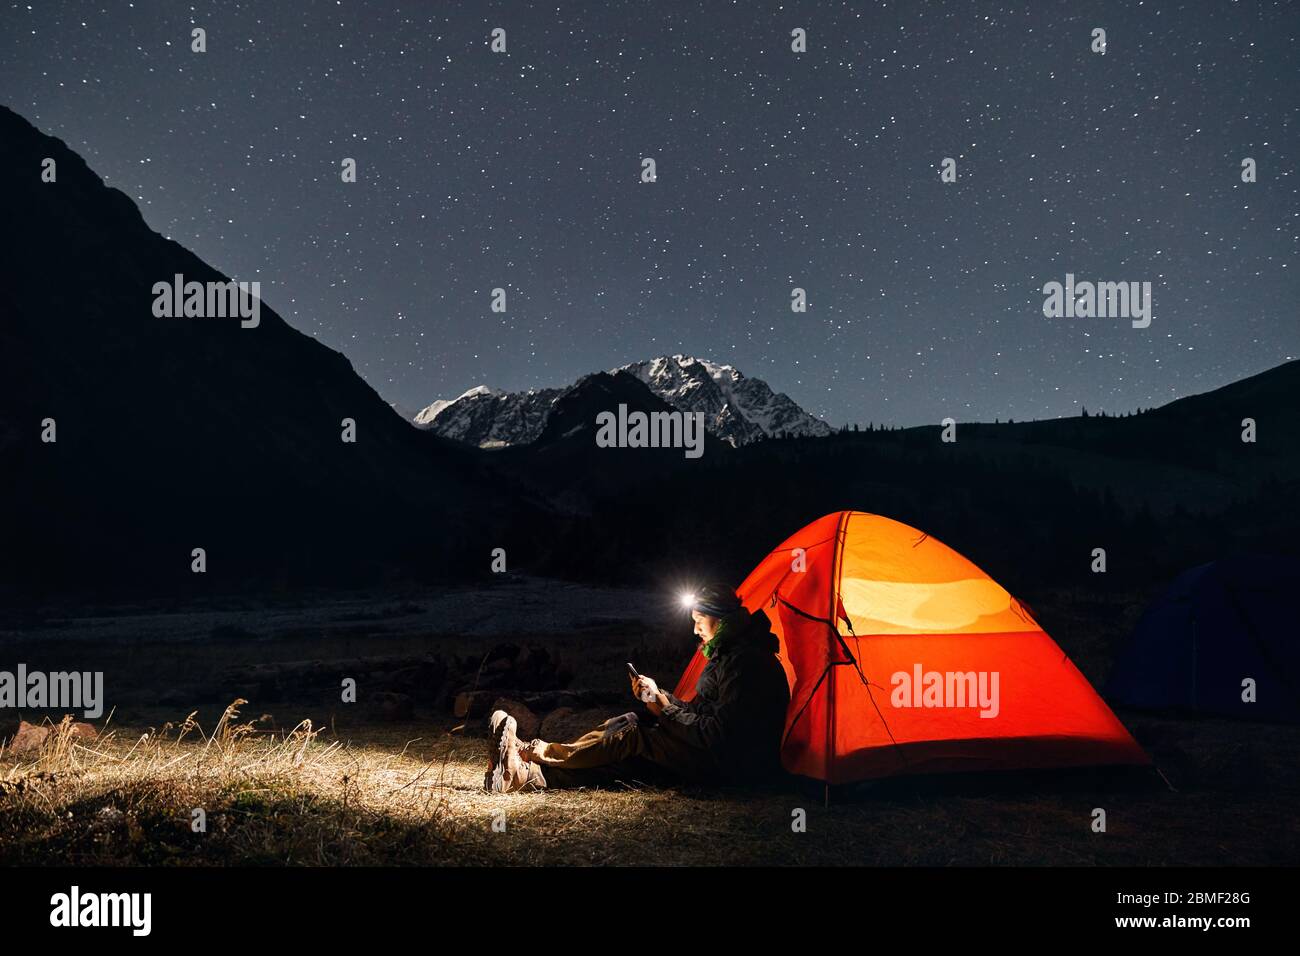 Man with headlamp near glowing orange tent in the mountains under night sky with stars Stock Photo